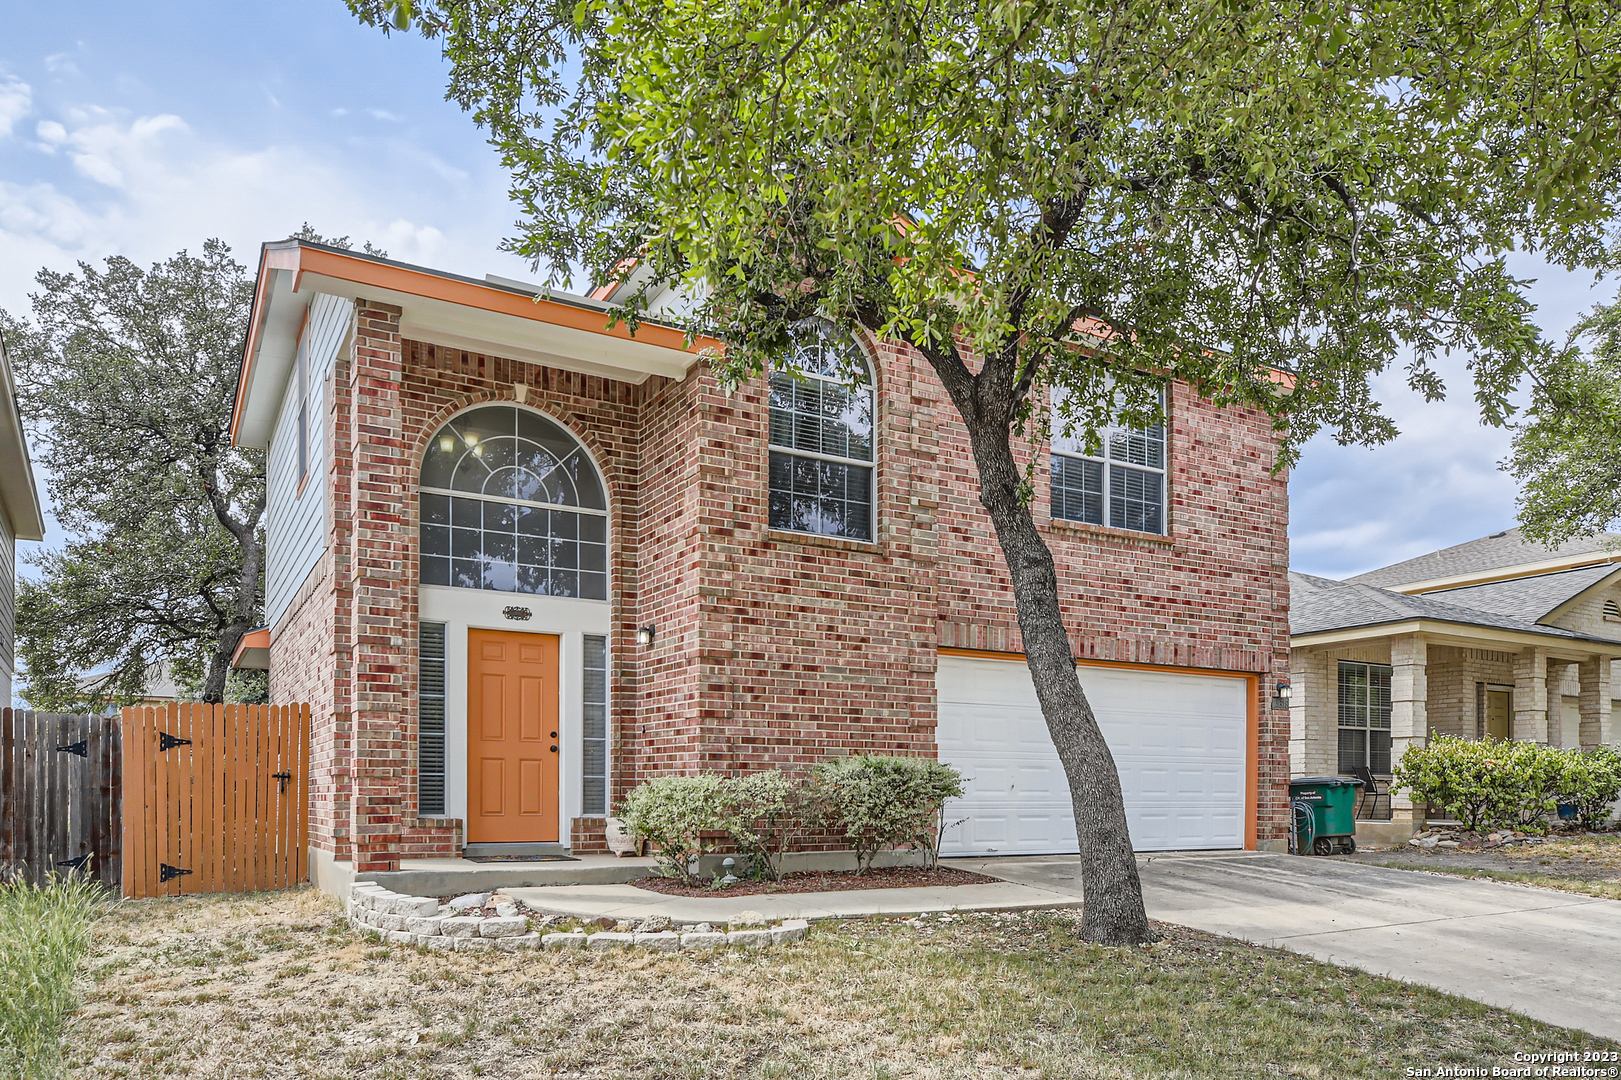 Photo of 13619 Sonora Blf in Helotes, TX